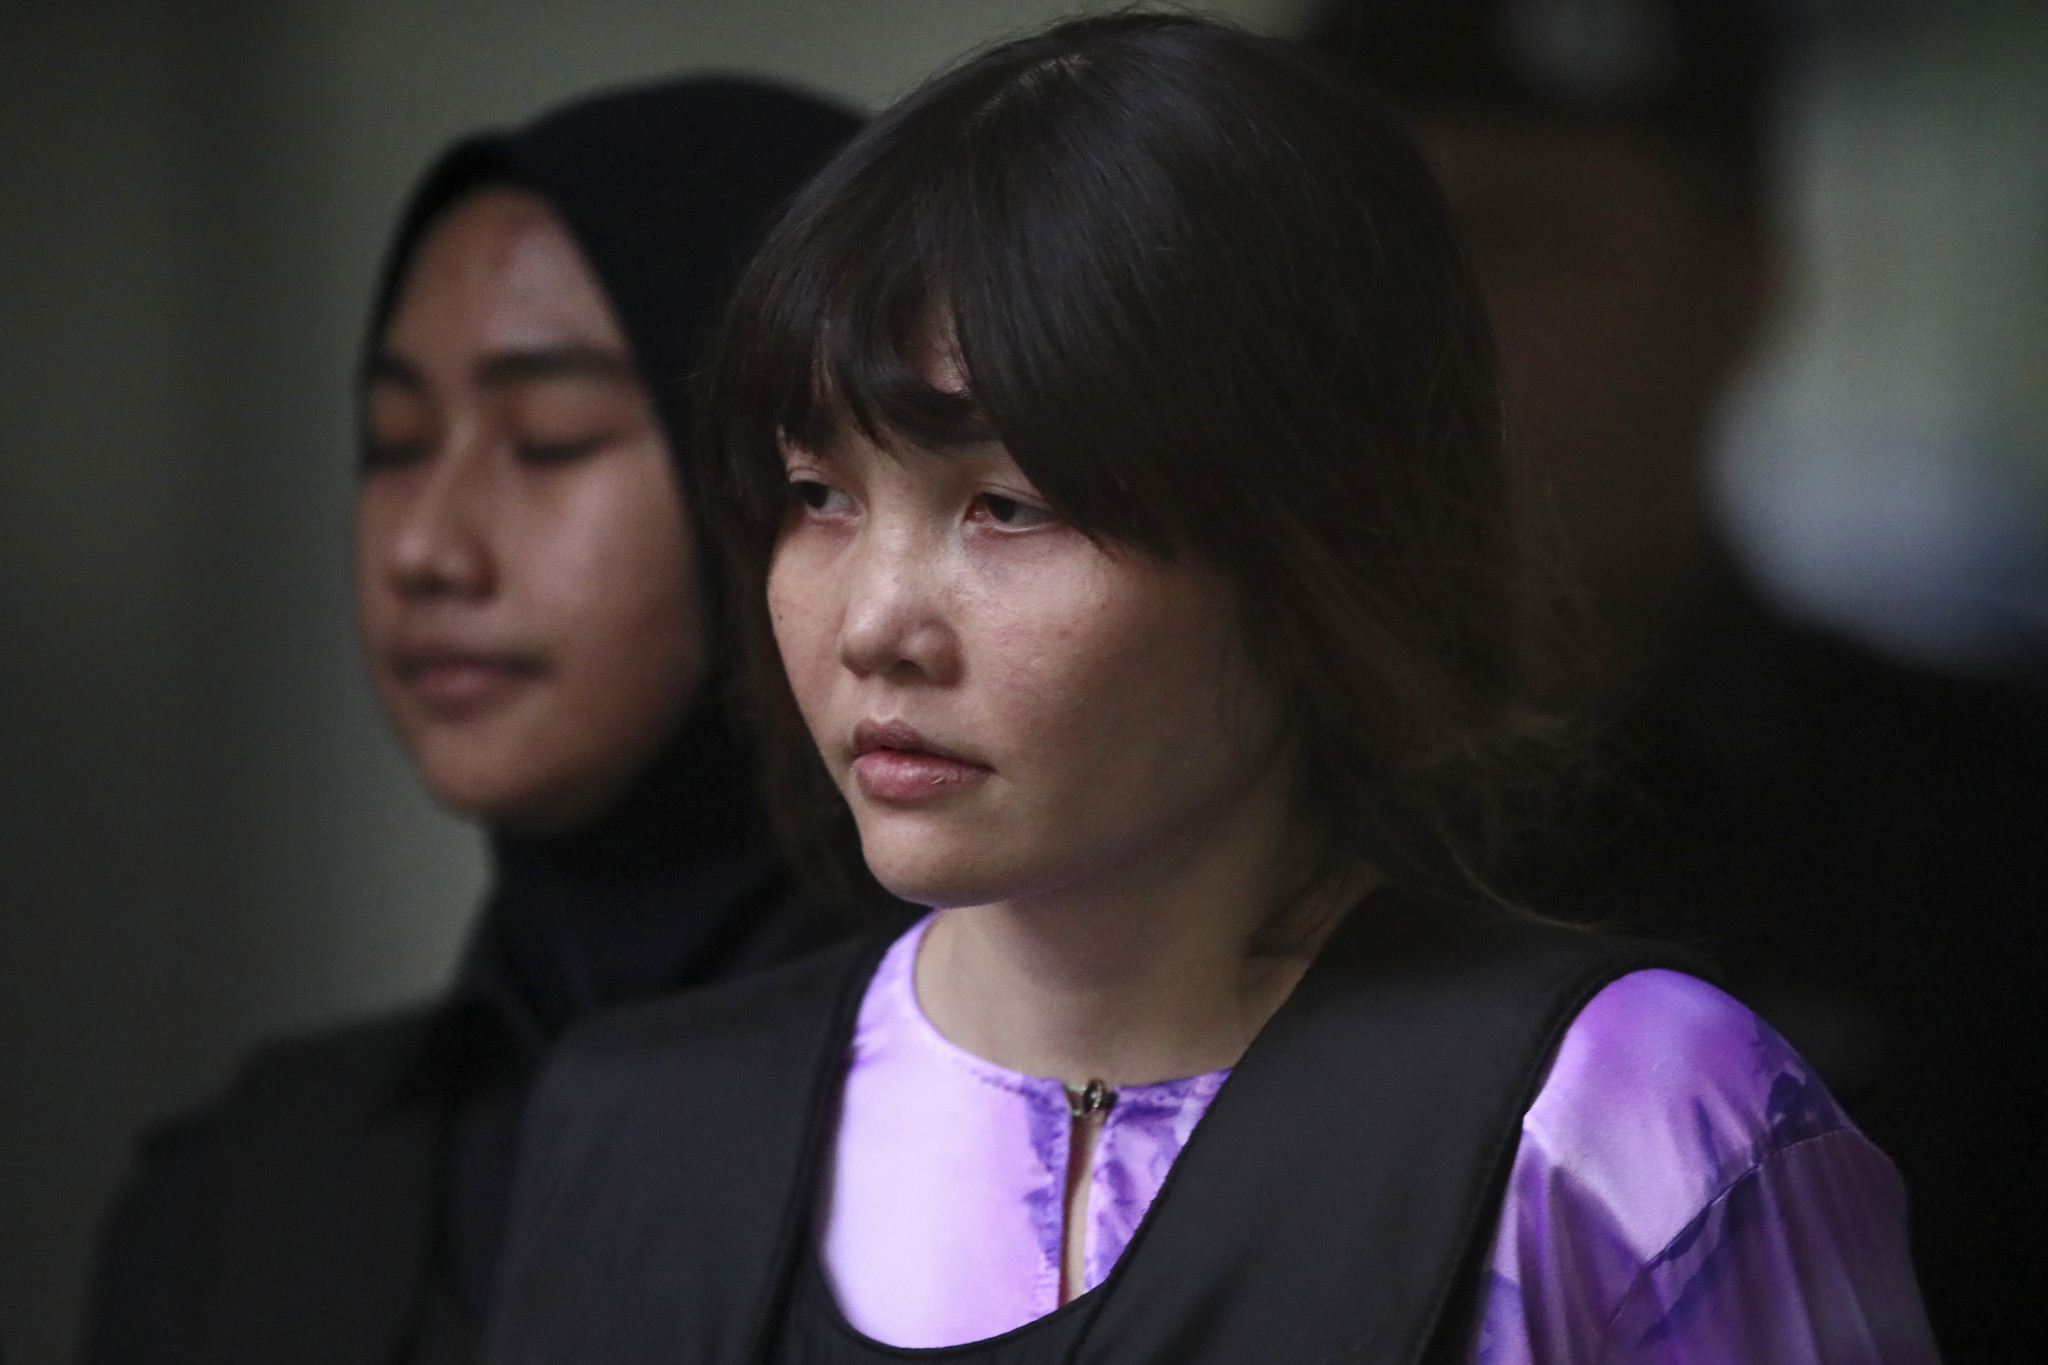 Video of fatal attack on Kim Jong Nam shown at women's trial - Chicago Tribune2048 x 1365